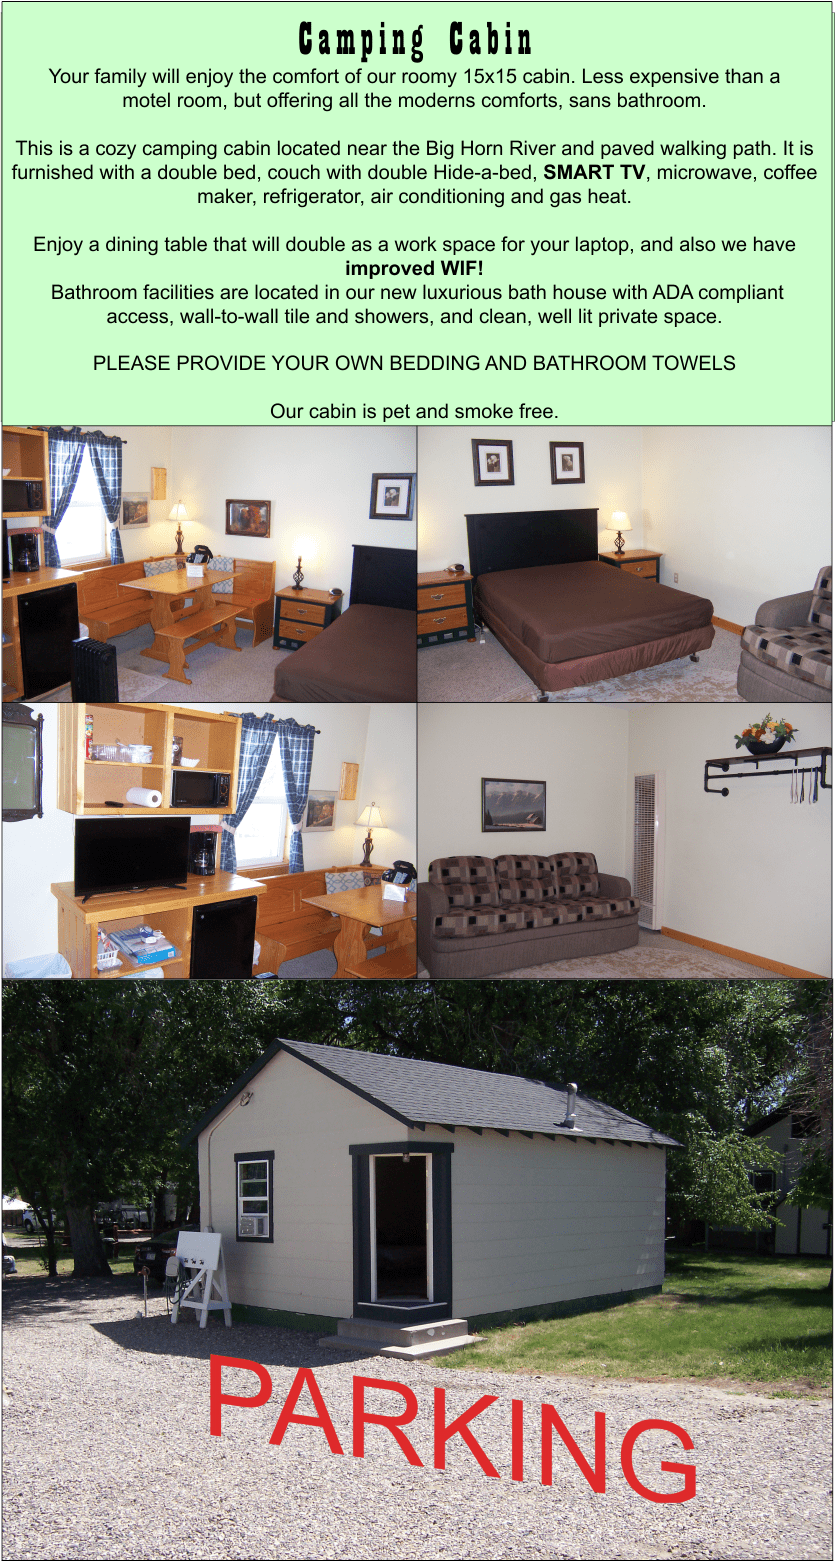 Your family will enjoy the comfort of our roomy 15x15 cabin. Less expensive than a 
motel room, but offering all the moderns comforts. This is a cozy camping ca